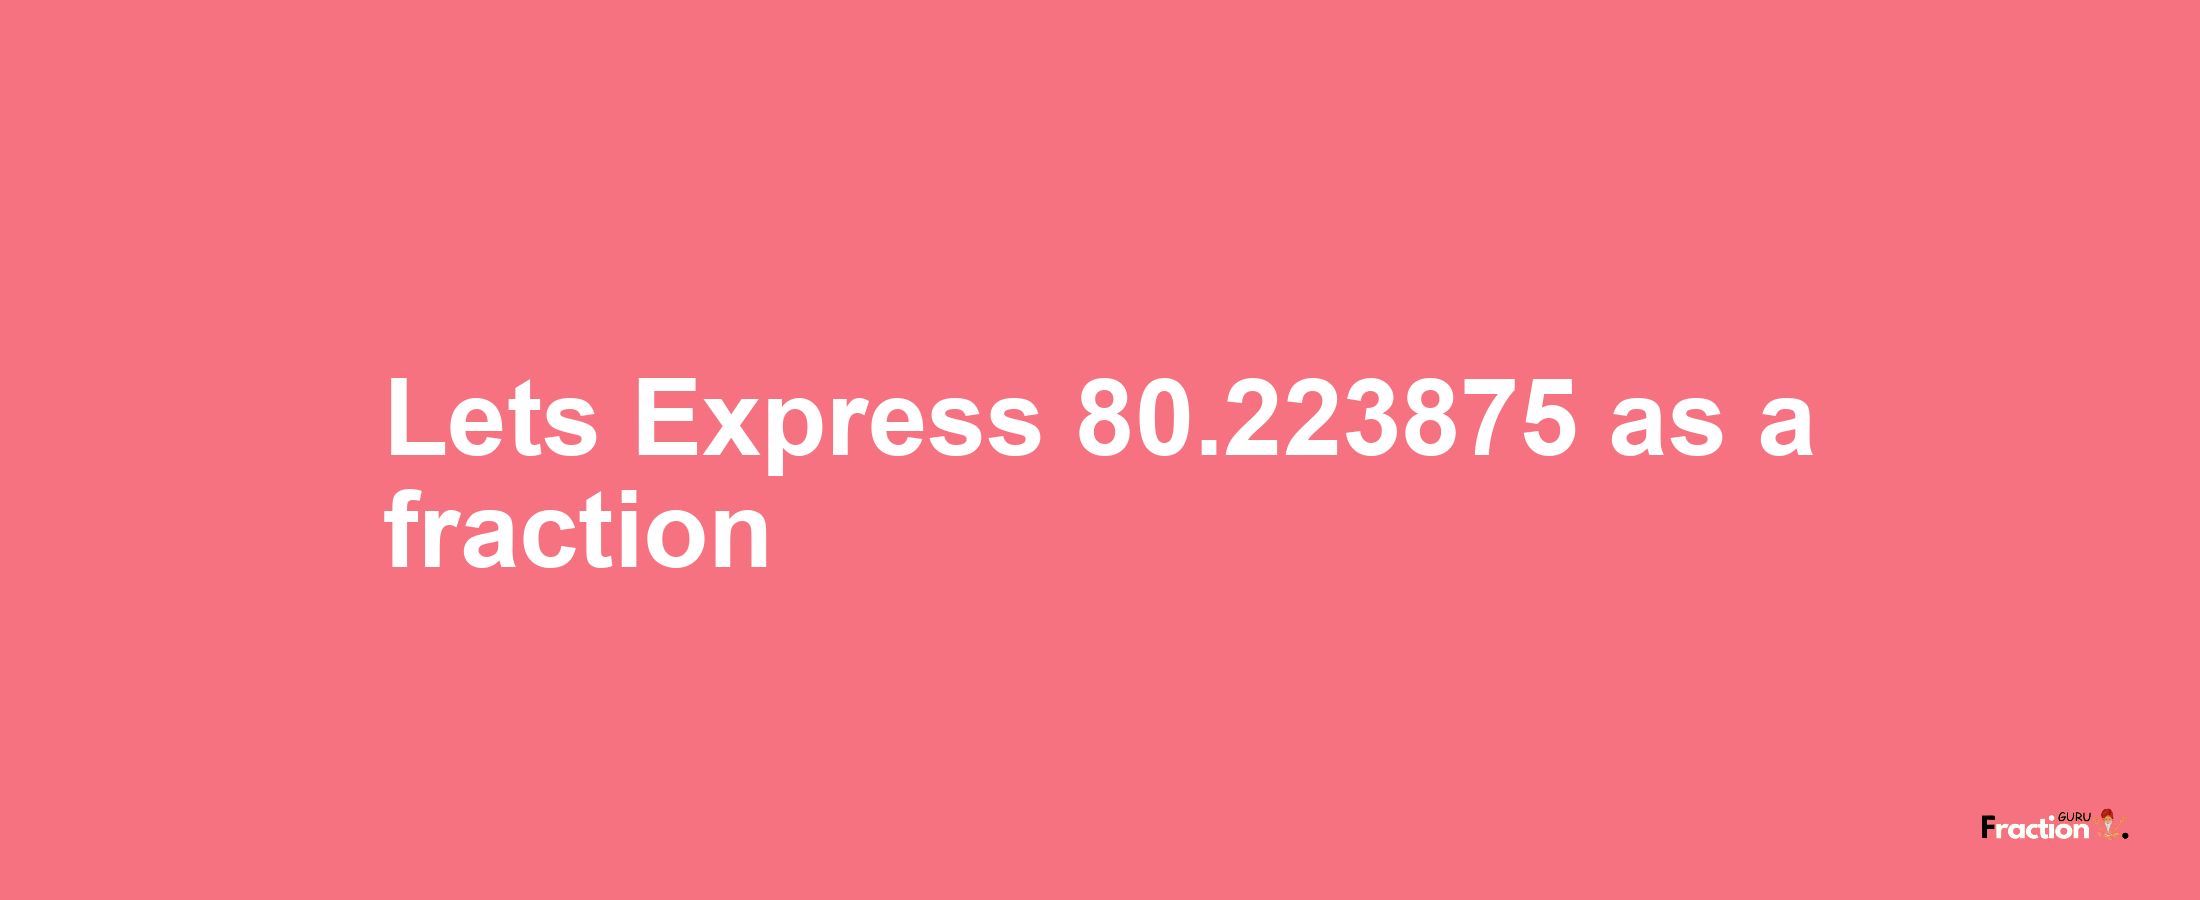 Lets Express 80.223875 as afraction